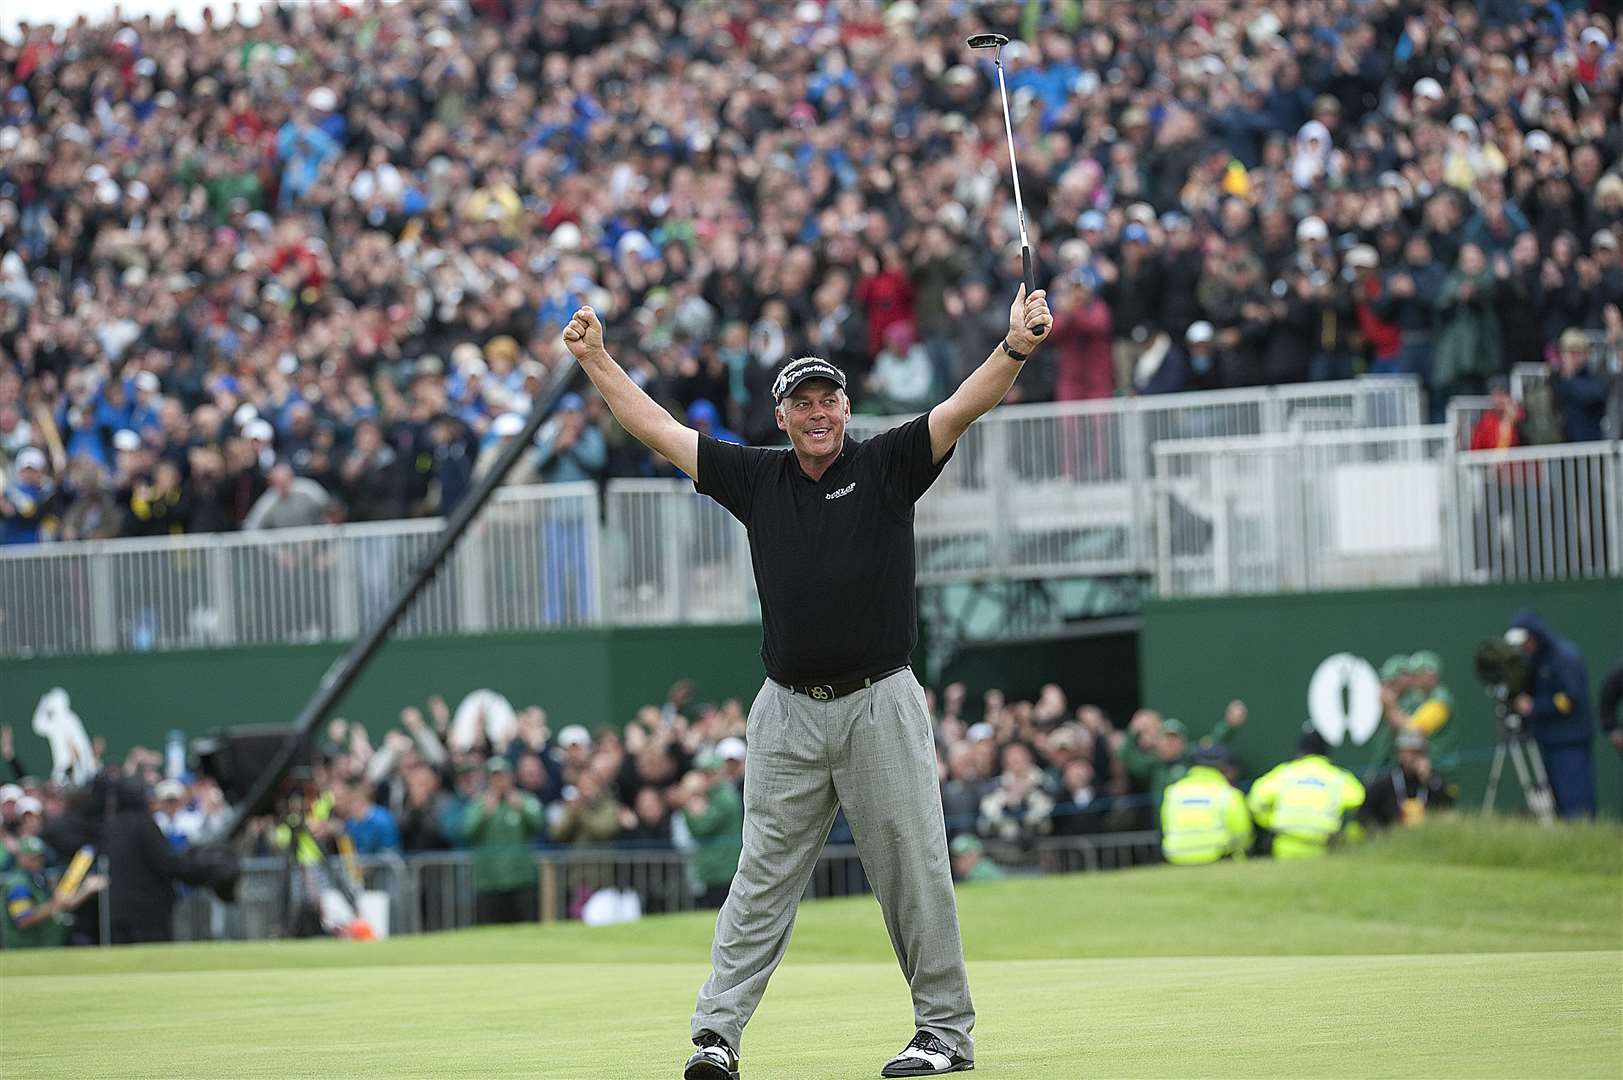 Darren Clarke - winner of The Open 2011 when the championship was last at Royal St George's Golf Club, Sandwich